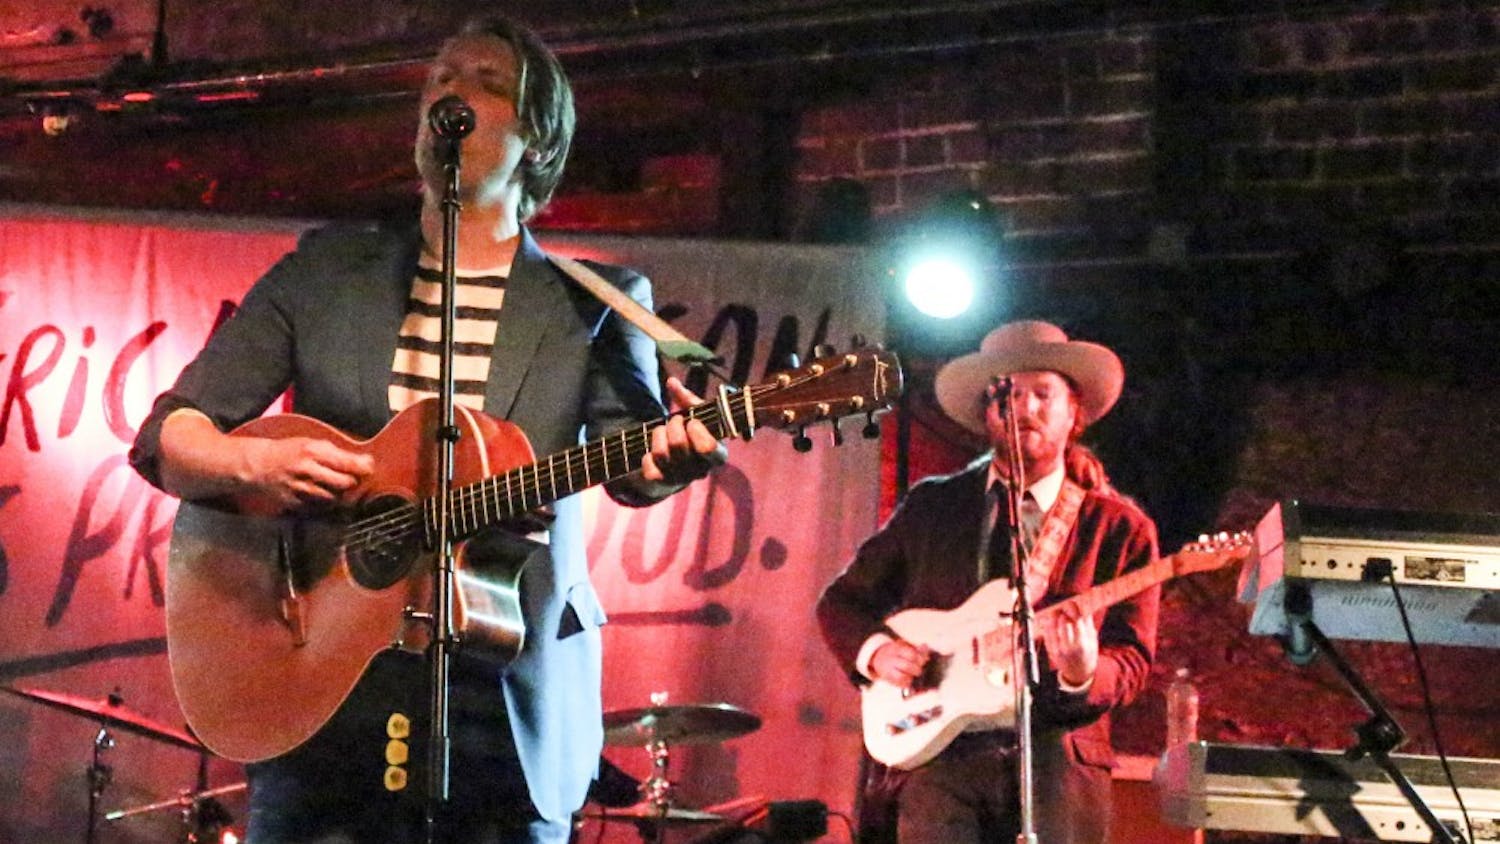 Eric Hutchinson, left, and Elliott Blaufuss, right, perform Saturday night at The Bluebird. Bloomington is a stop of their The Anyone Who Knows Me Tour.